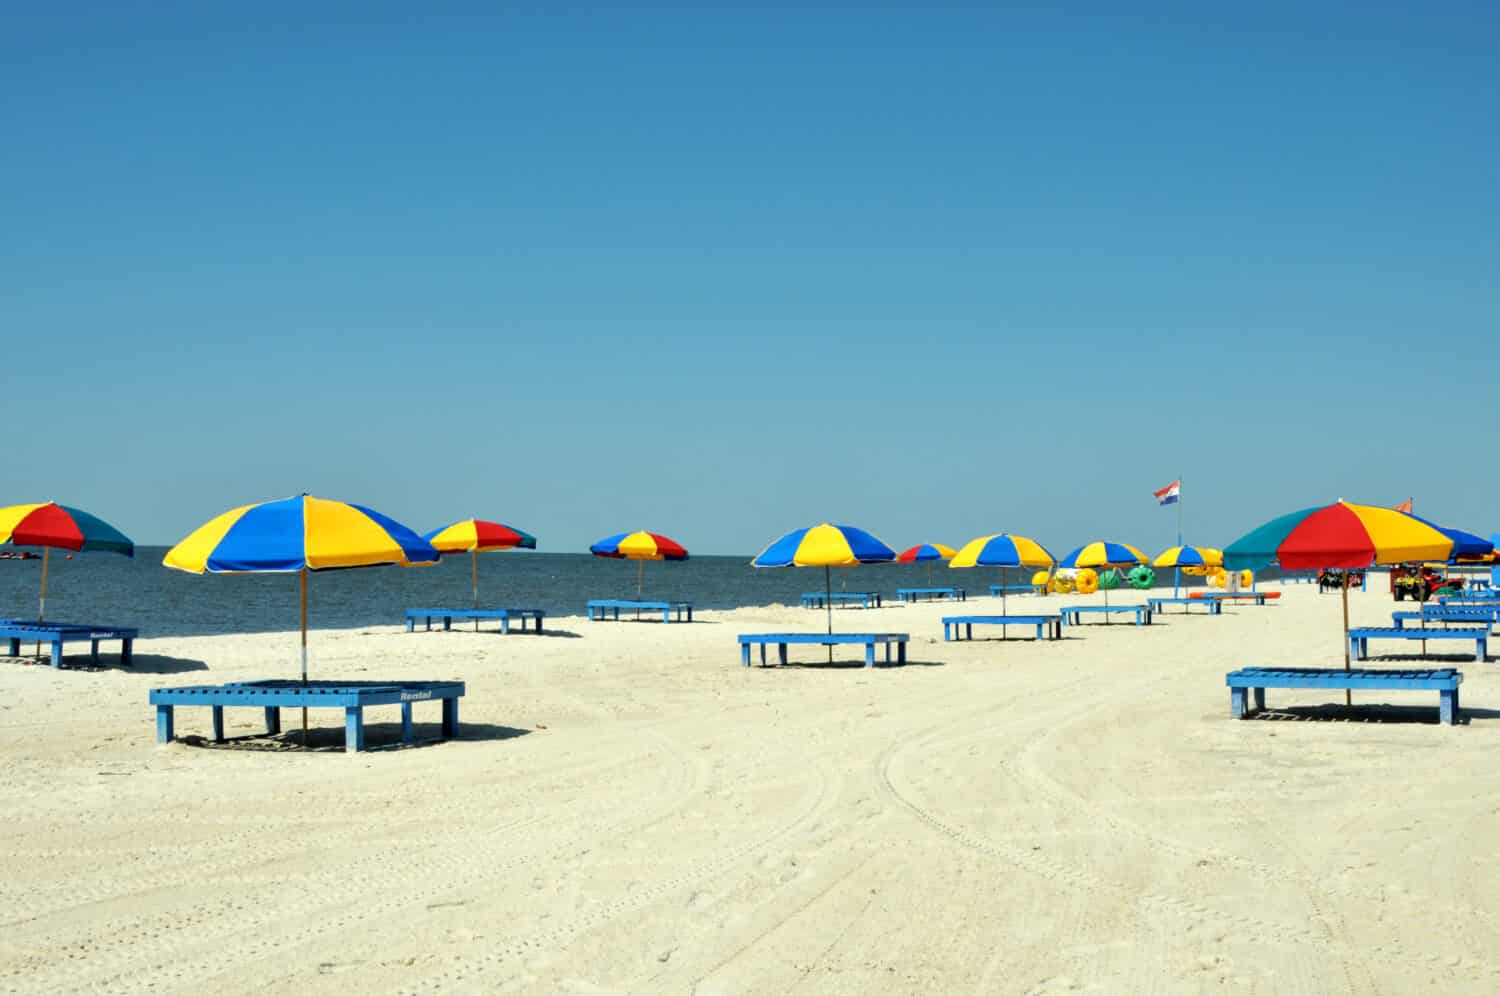 Lounge chairs, umbrellas, and oversized trikes scattered along Biloxi Beach in Mississippi on a spring day.